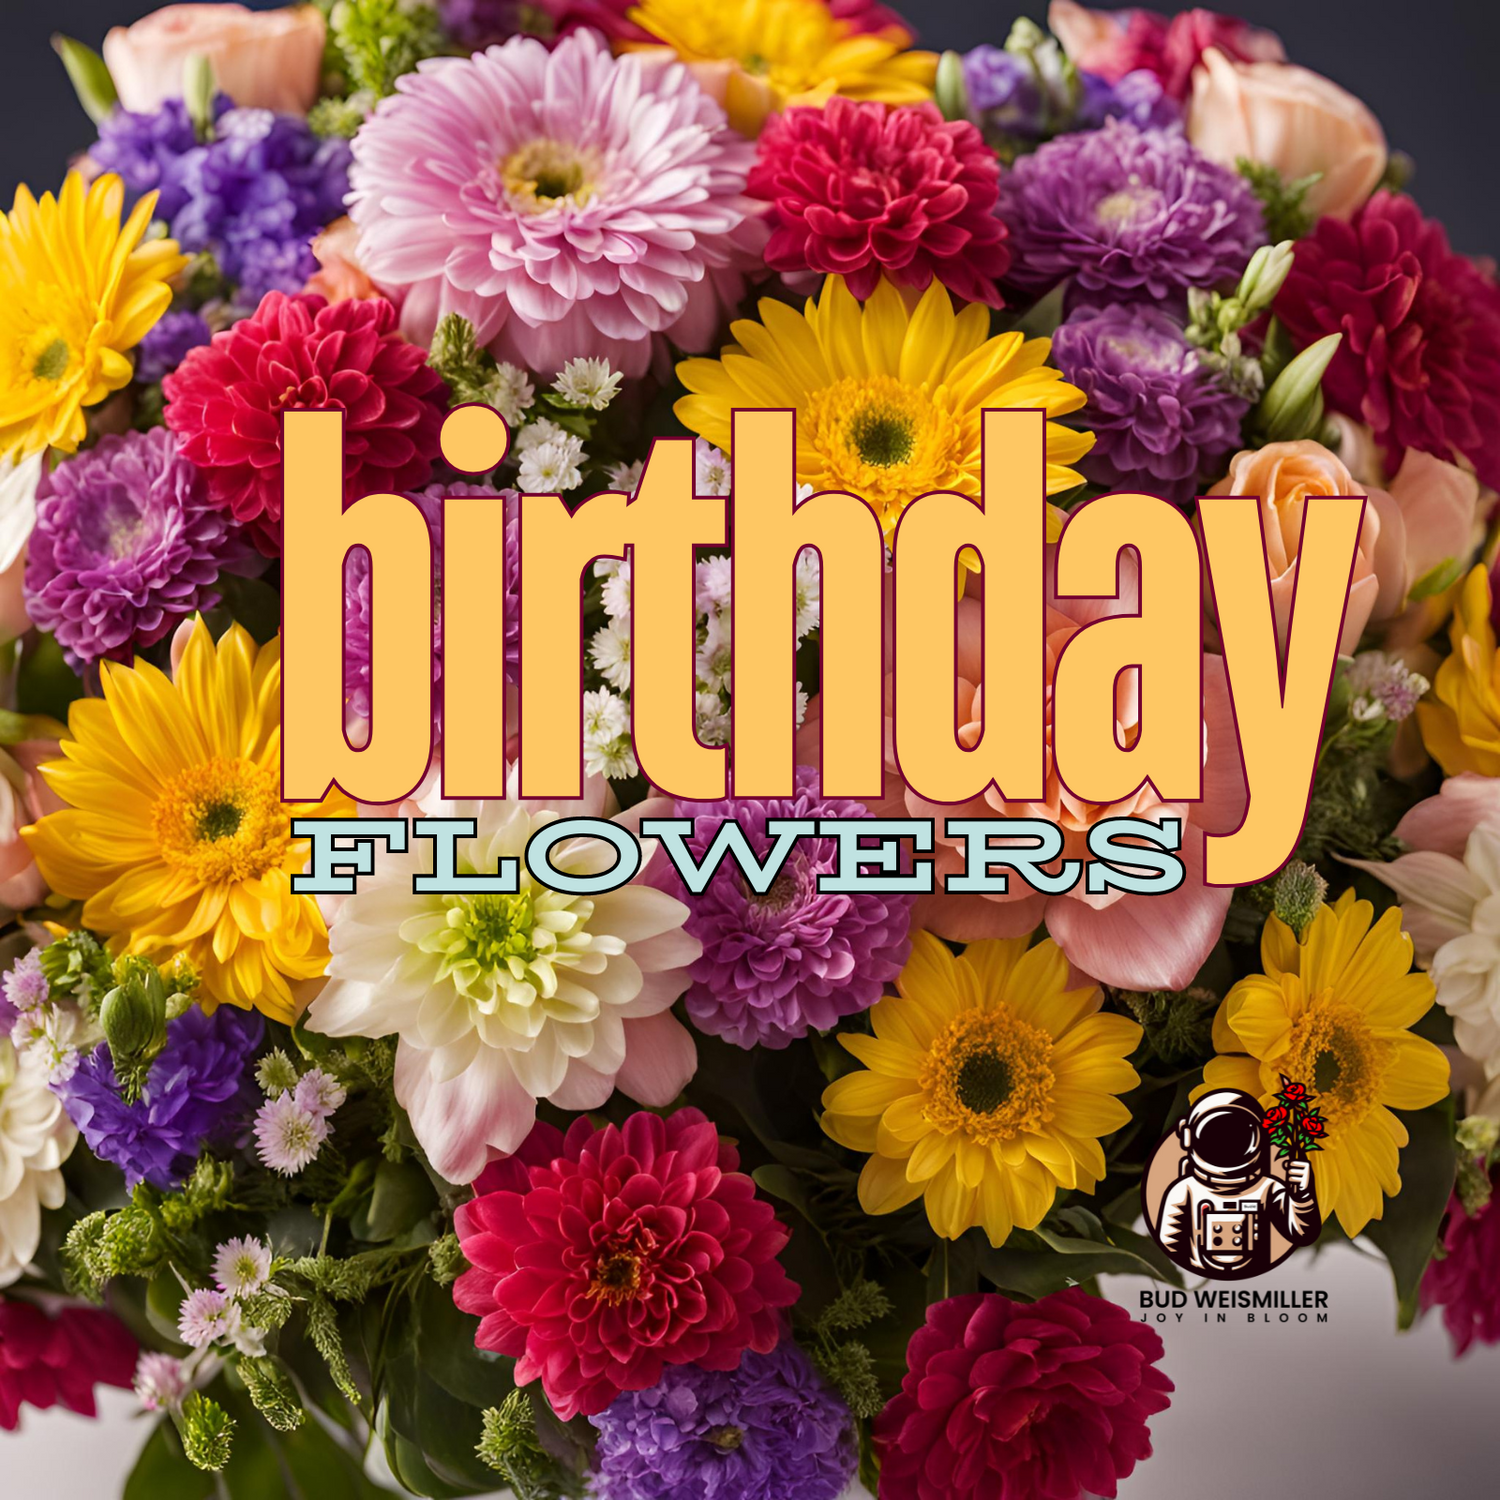 A graphic stating "birthday flowers" with a bouquet of bright flowers behind serving as the background.